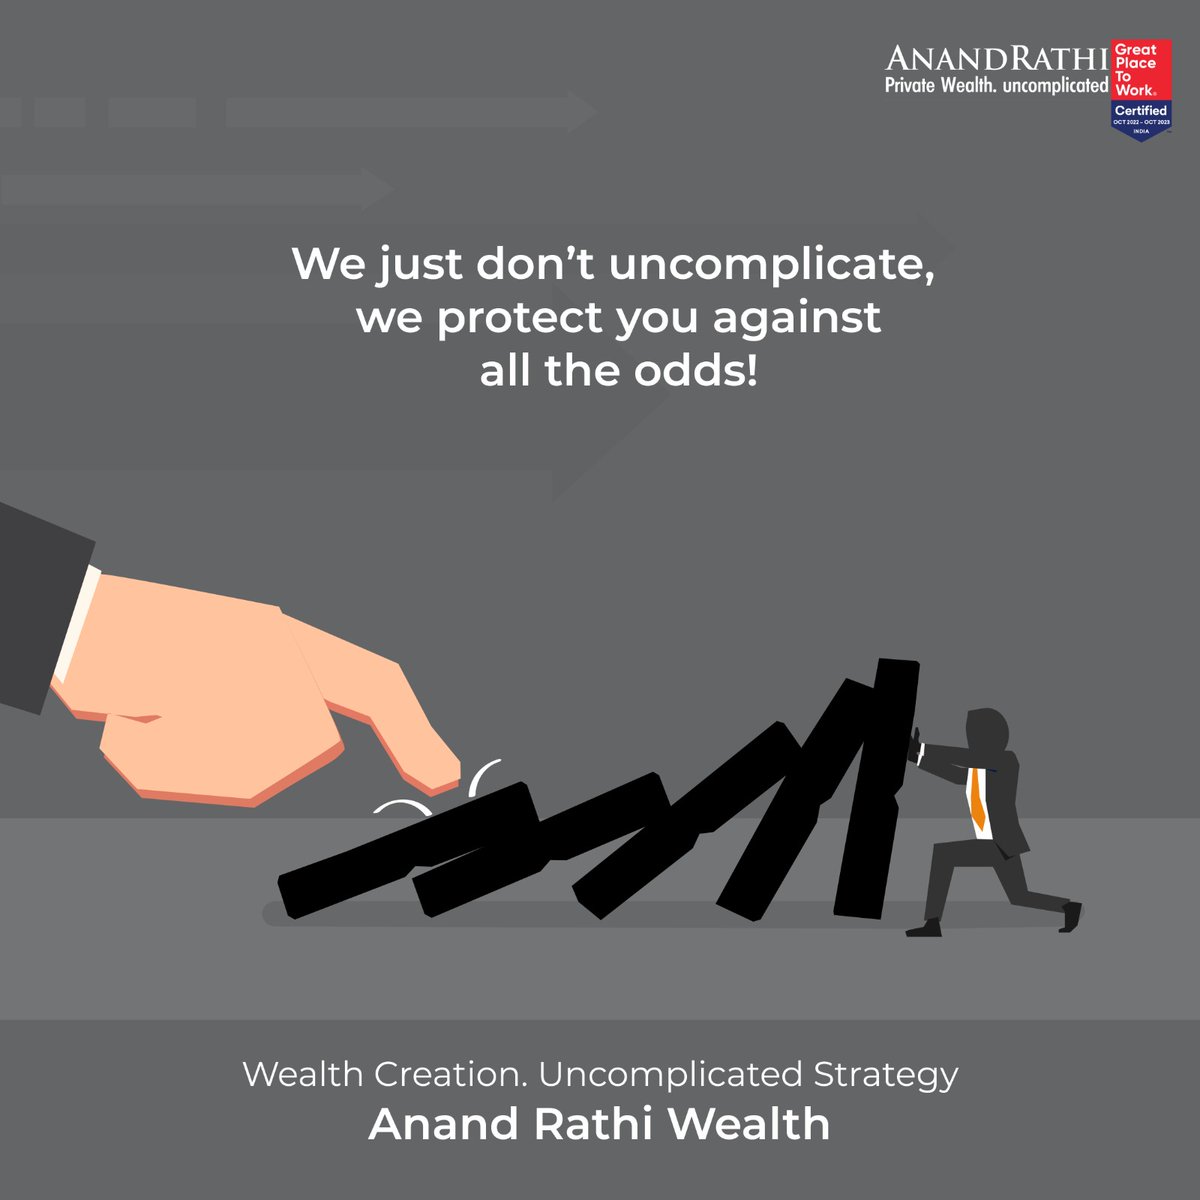 #Anandrathiwealth #makeithappen #uncomplicated

Know more: anandrathiwealth.in/landing

#mathematicalrevolution #financialplanning #wealthmanagement #mutualfunds #anandrathiwealth #investment #investor #investmentideas #databacked